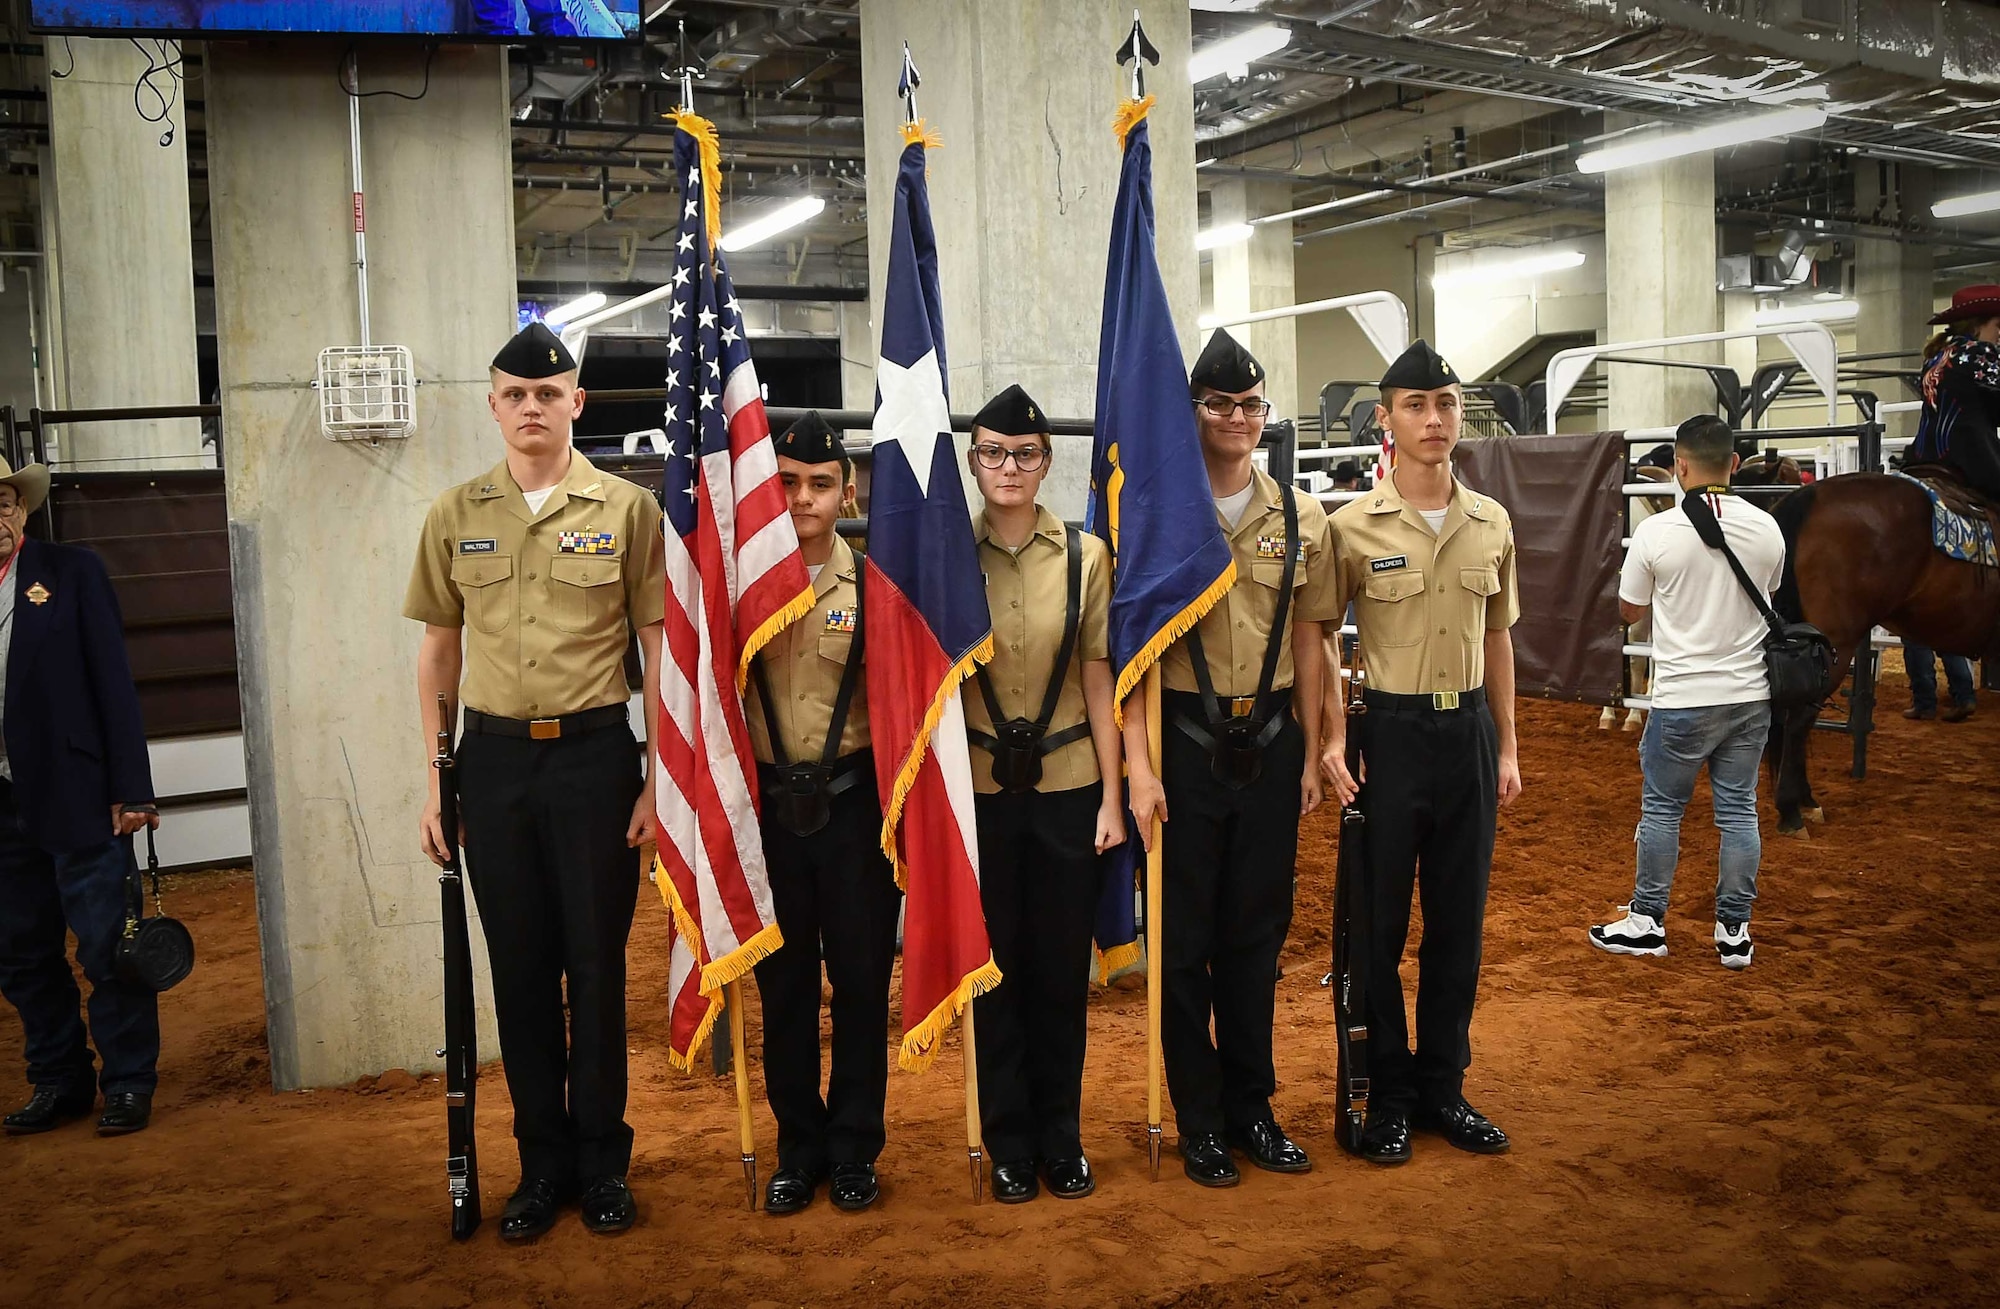 U.S. Navy JROTC cadets from Joshua High School, Joshua, Texas prepare to post the colors prior to the Military Appreciation Day Grand Entry at the Fort Worth Stock Show and Rodeo at Dickie’s Arena on February 3, 2020. This was the first year this event was held in the new arena. (U.S. Air Force Photo by Master Sgt. Jeremy Roman)